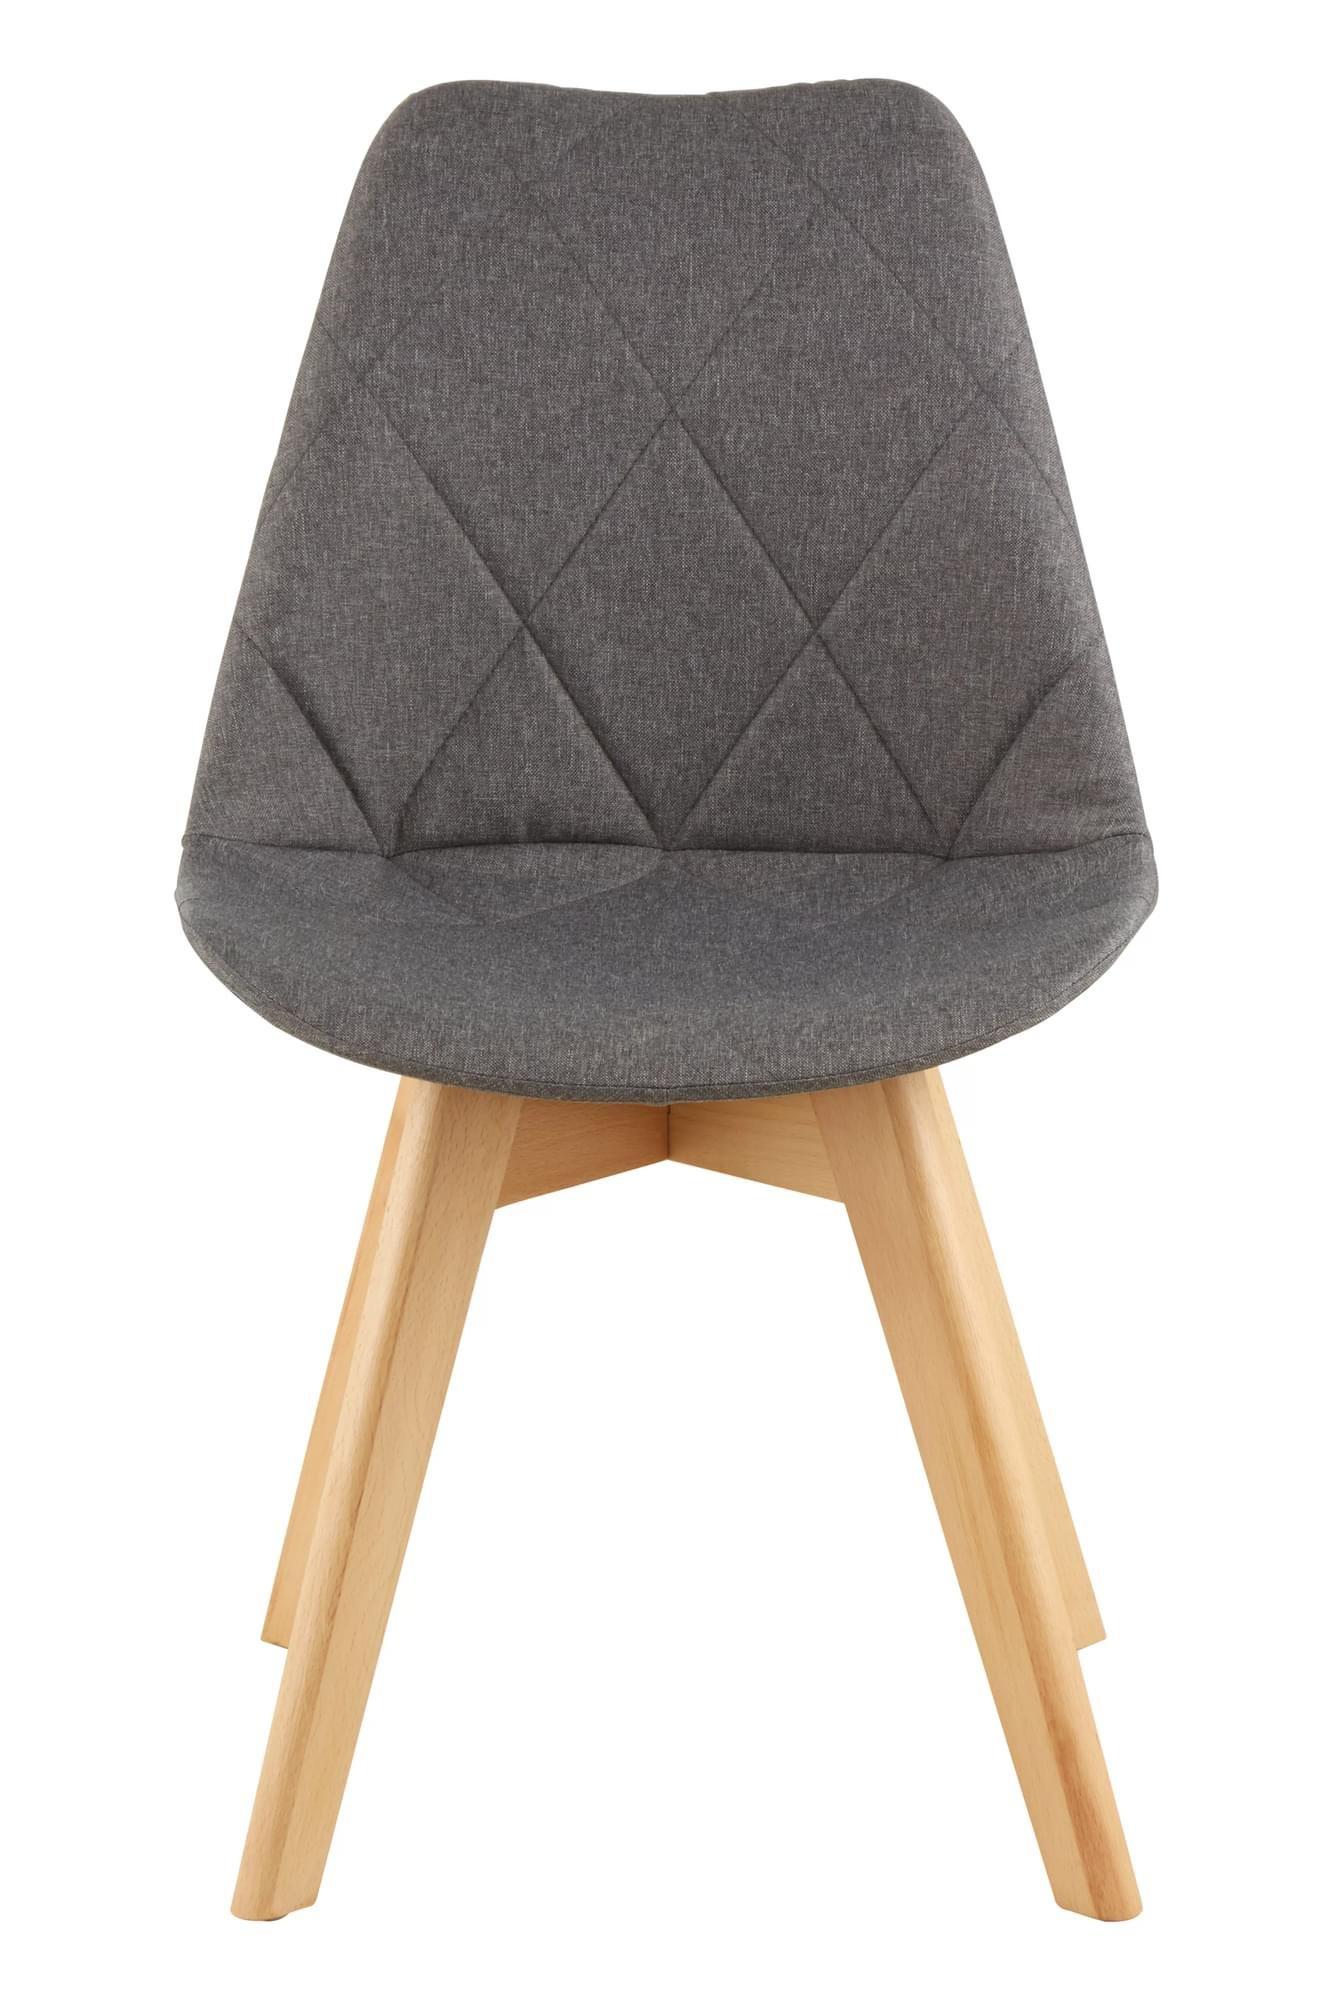 Interiors by Premier Stockholm Grey Diamond Pattern Dining Chair